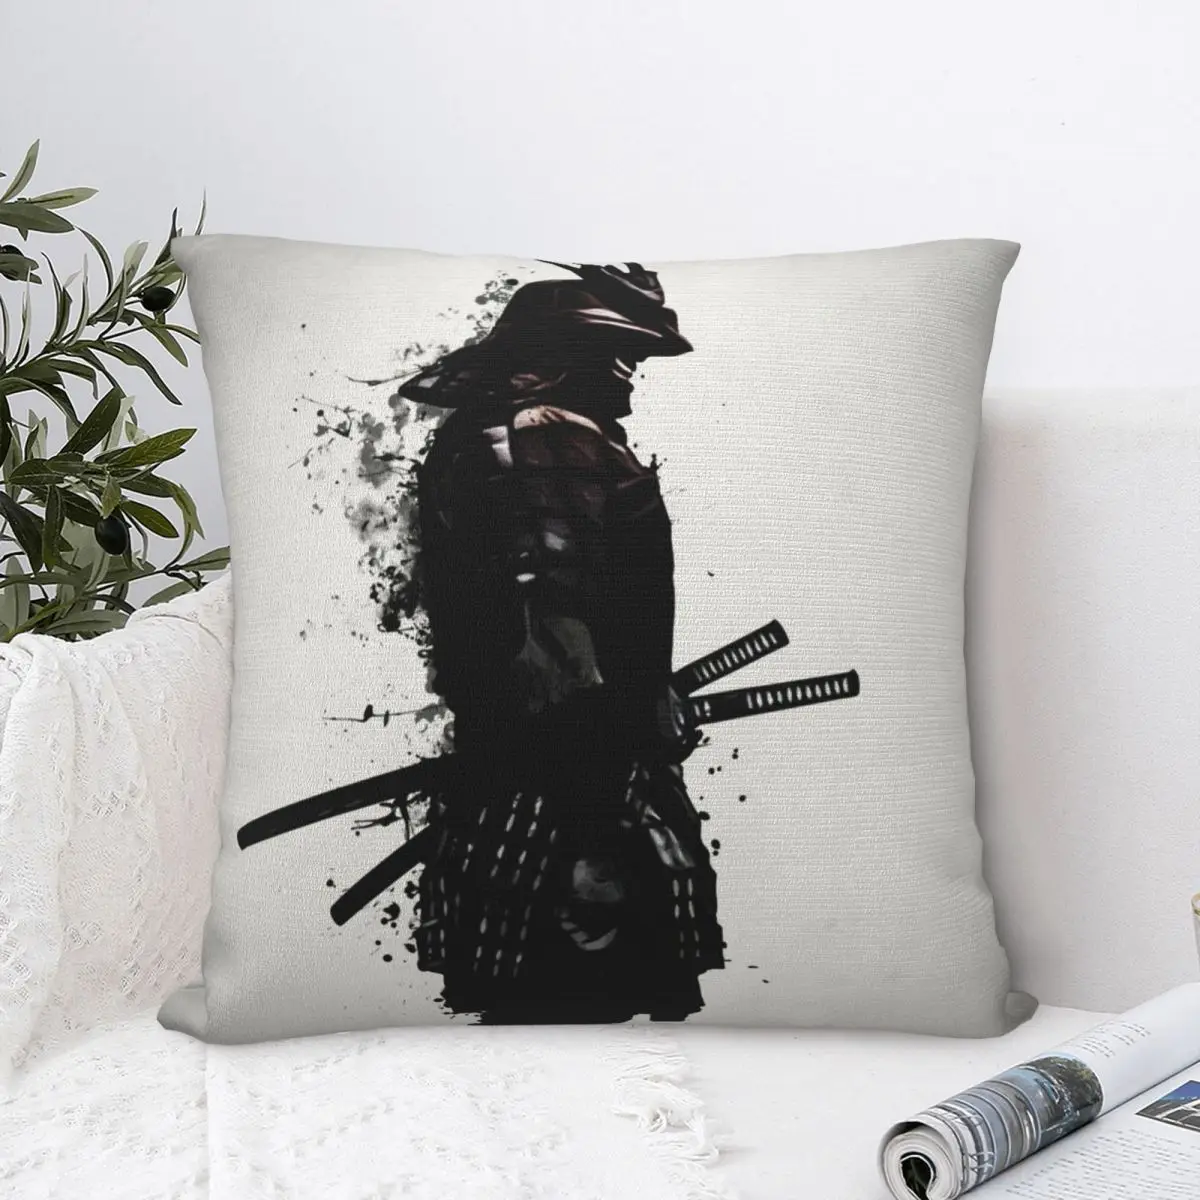 

Armored Samurai Square Pillowcase Cushion Cover Comfort Pillow Case Polyester Throw Pillow cover For Home Sofa Living Room